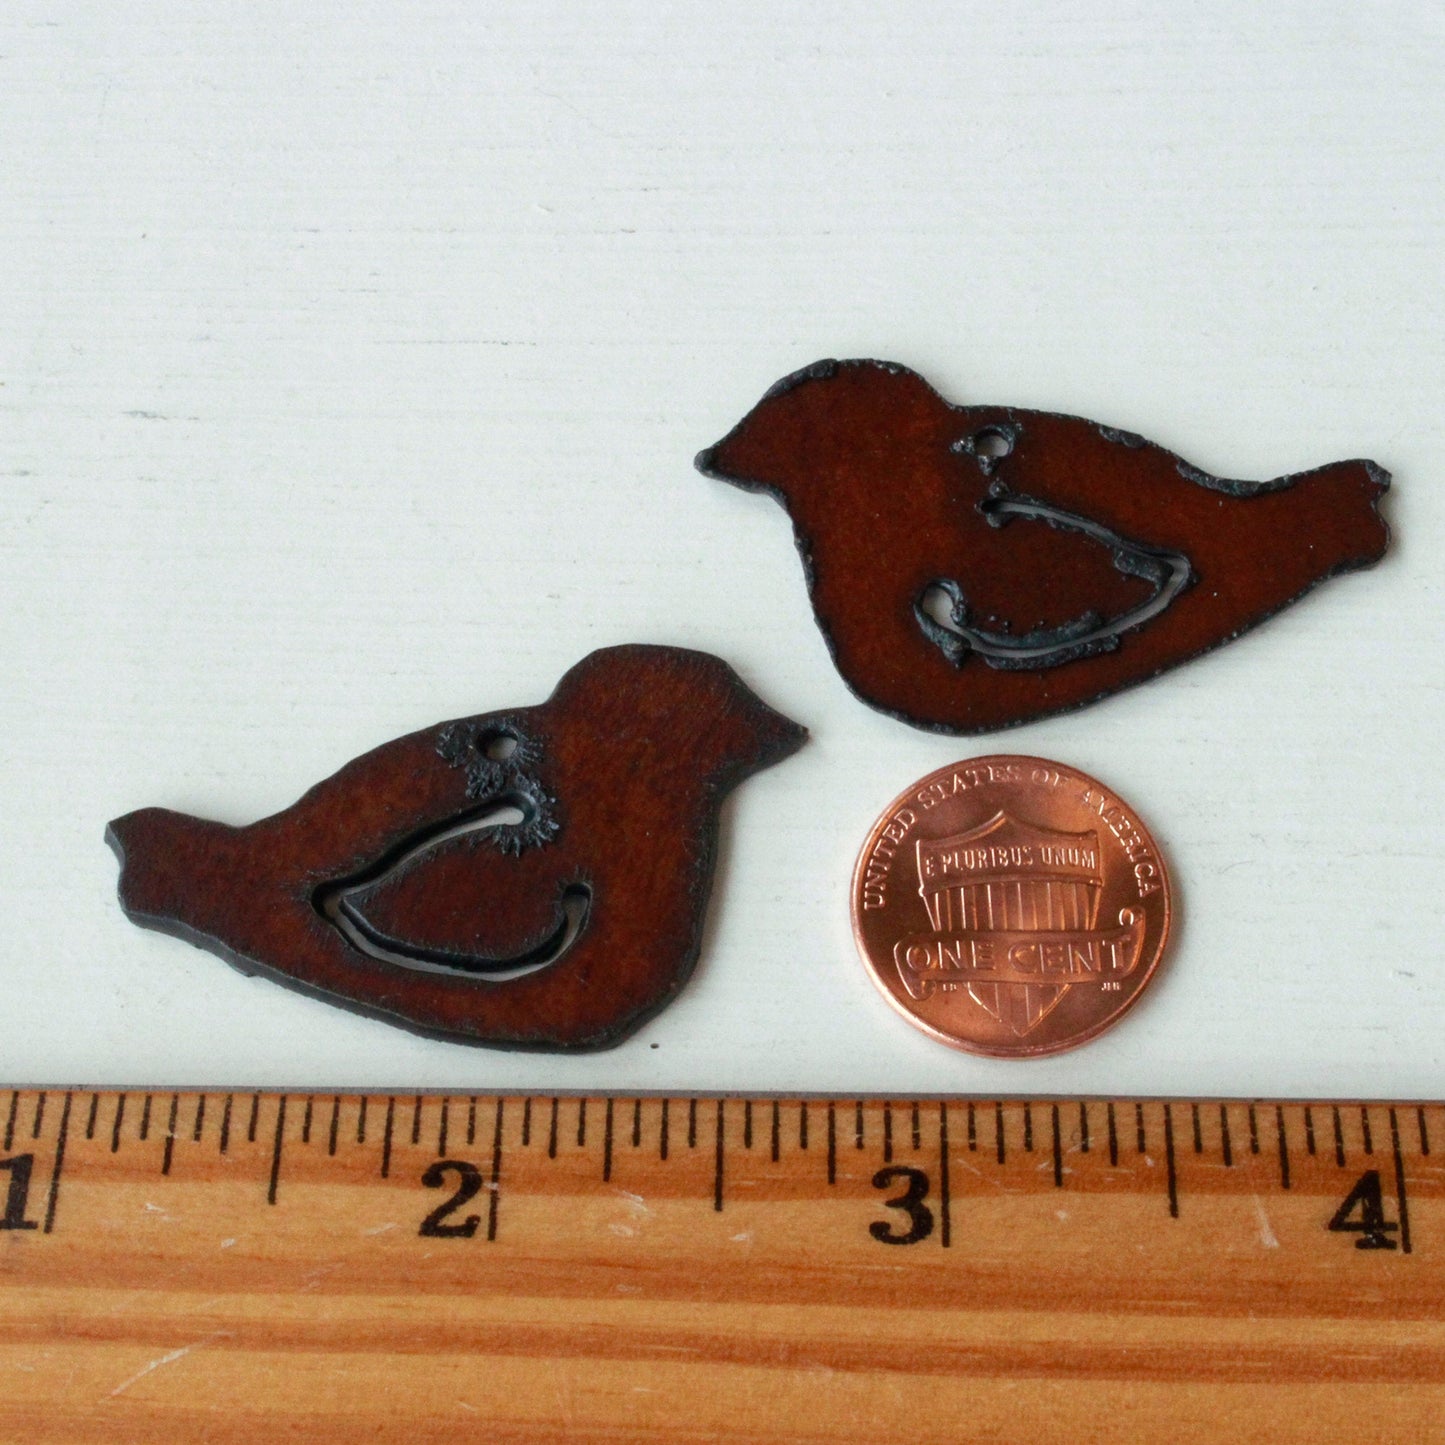 Load image into Gallery viewer, 27x44mm Rusted Iron Bird Pendant - 1 Pendant
